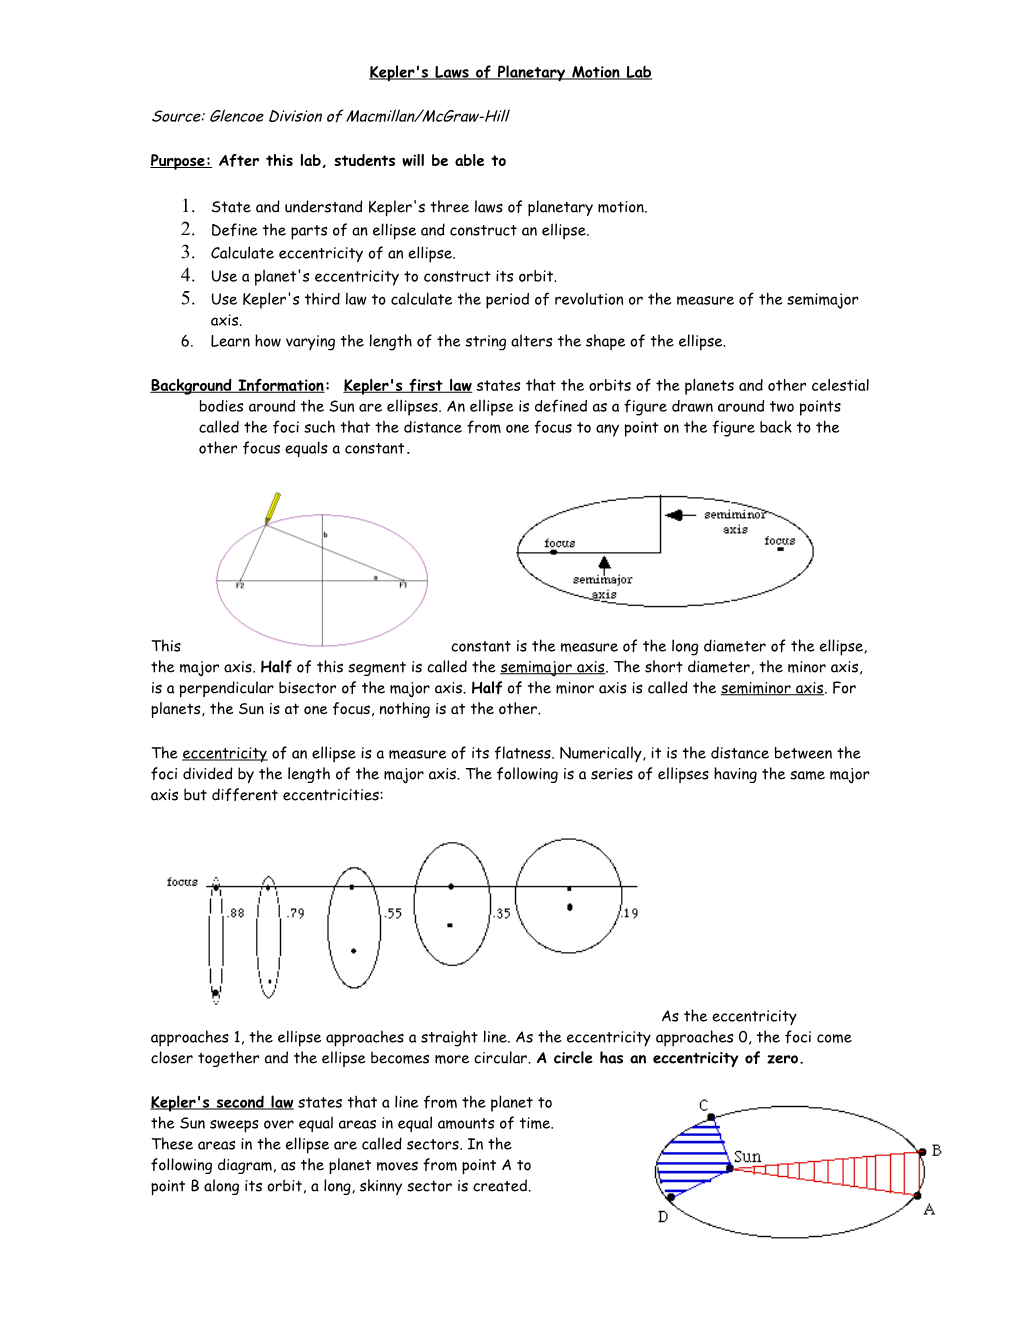 Lesson Plan on Kepler's Laws of Planetary Motion